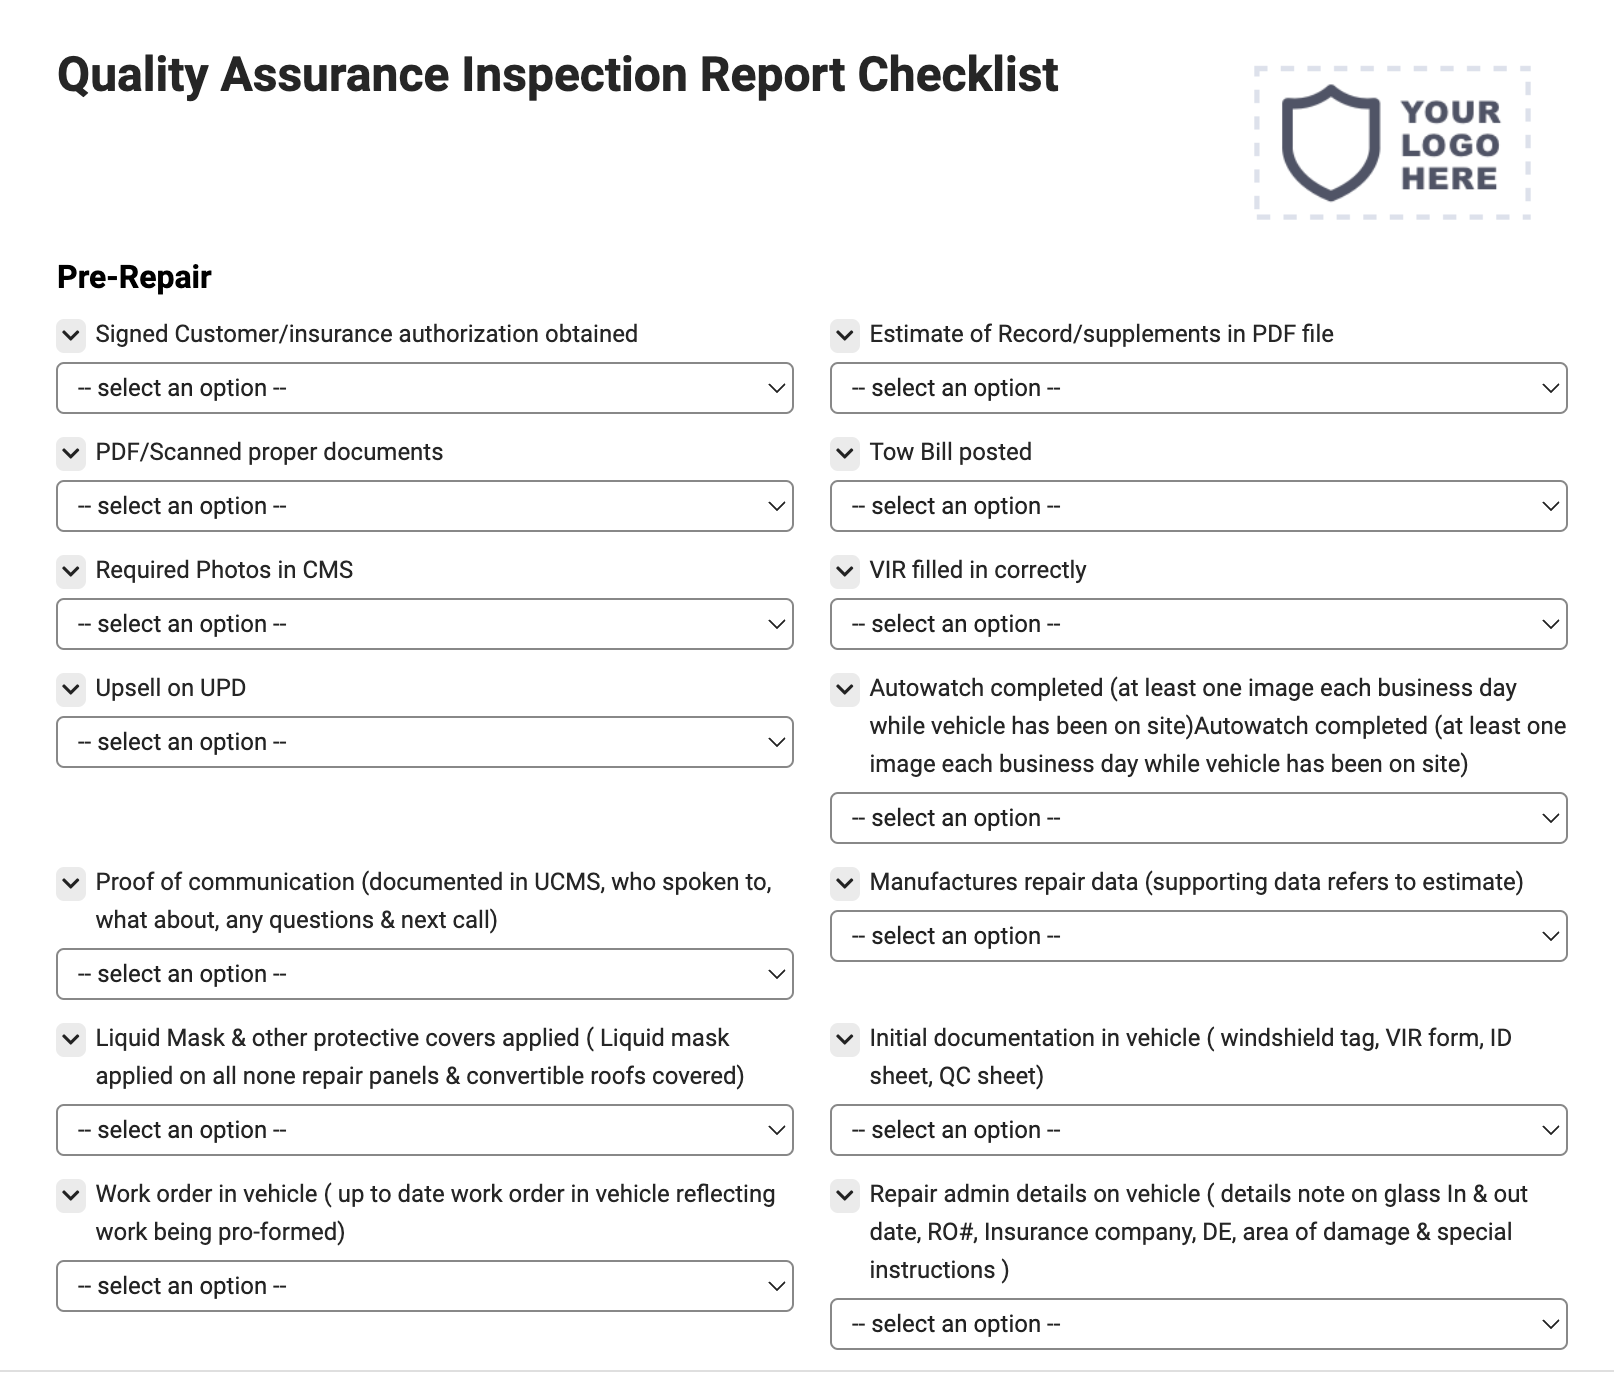 Quality Assurance Inspection Report Checklist